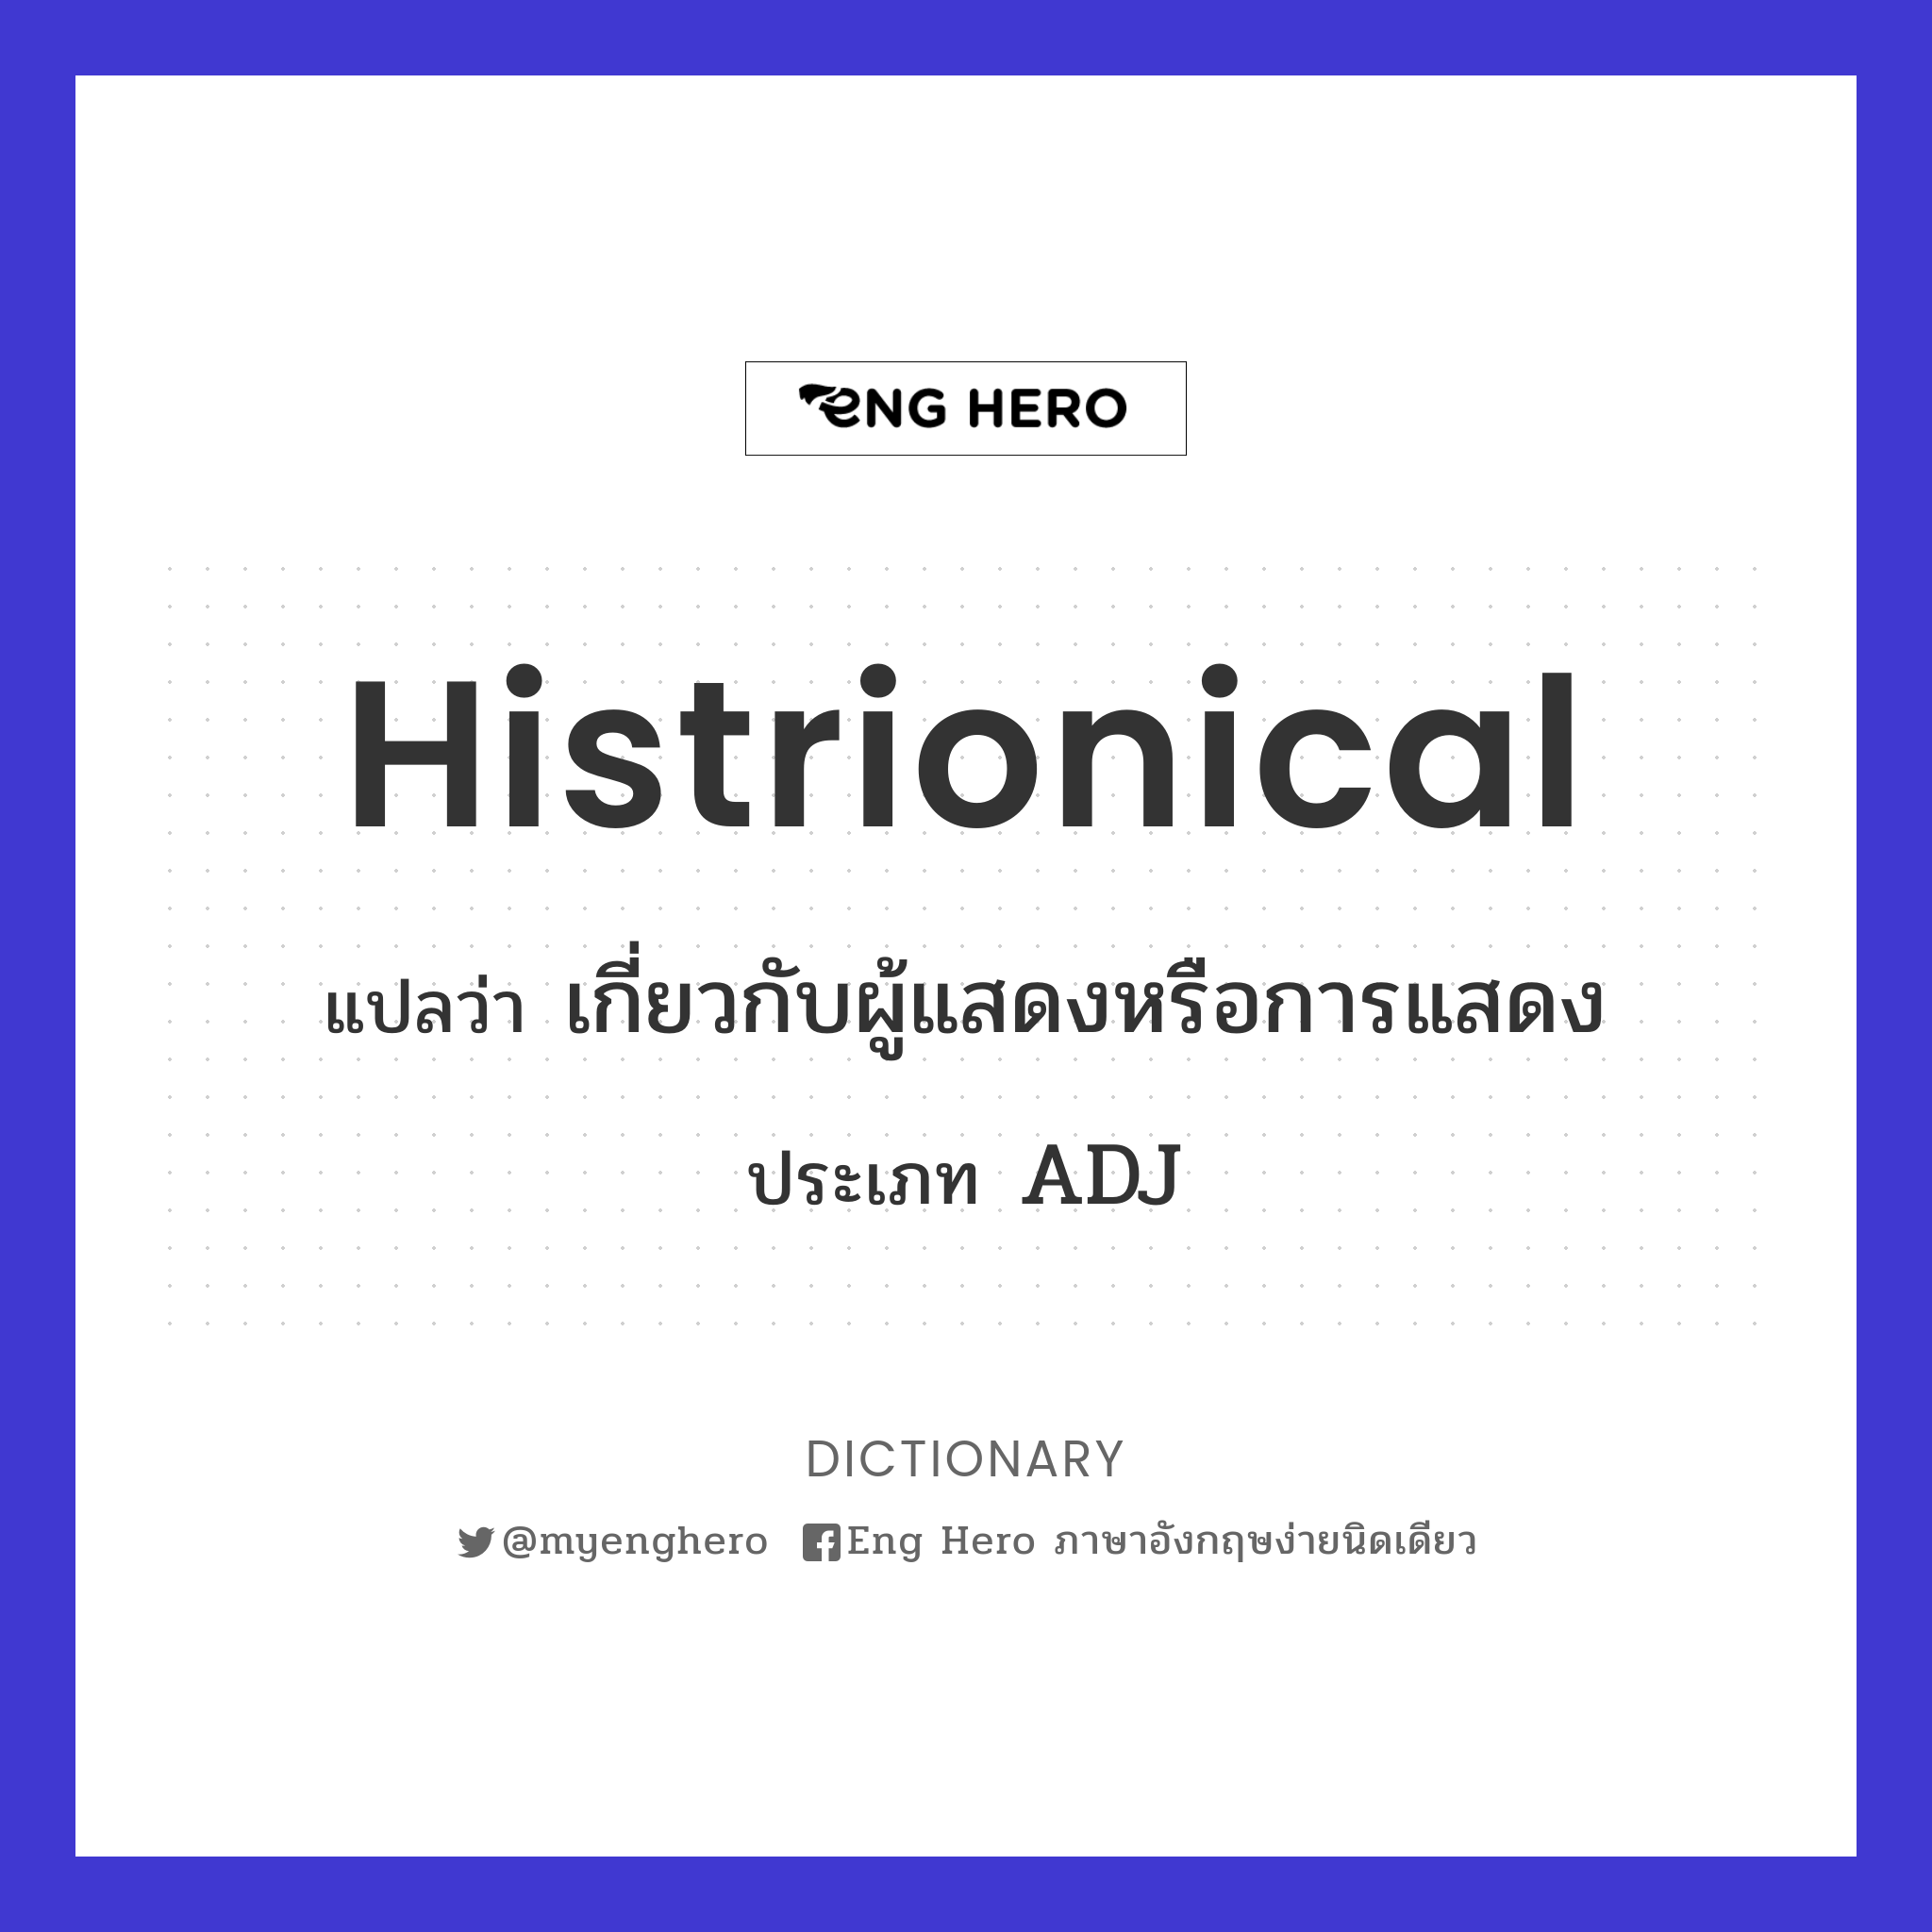 histrionical